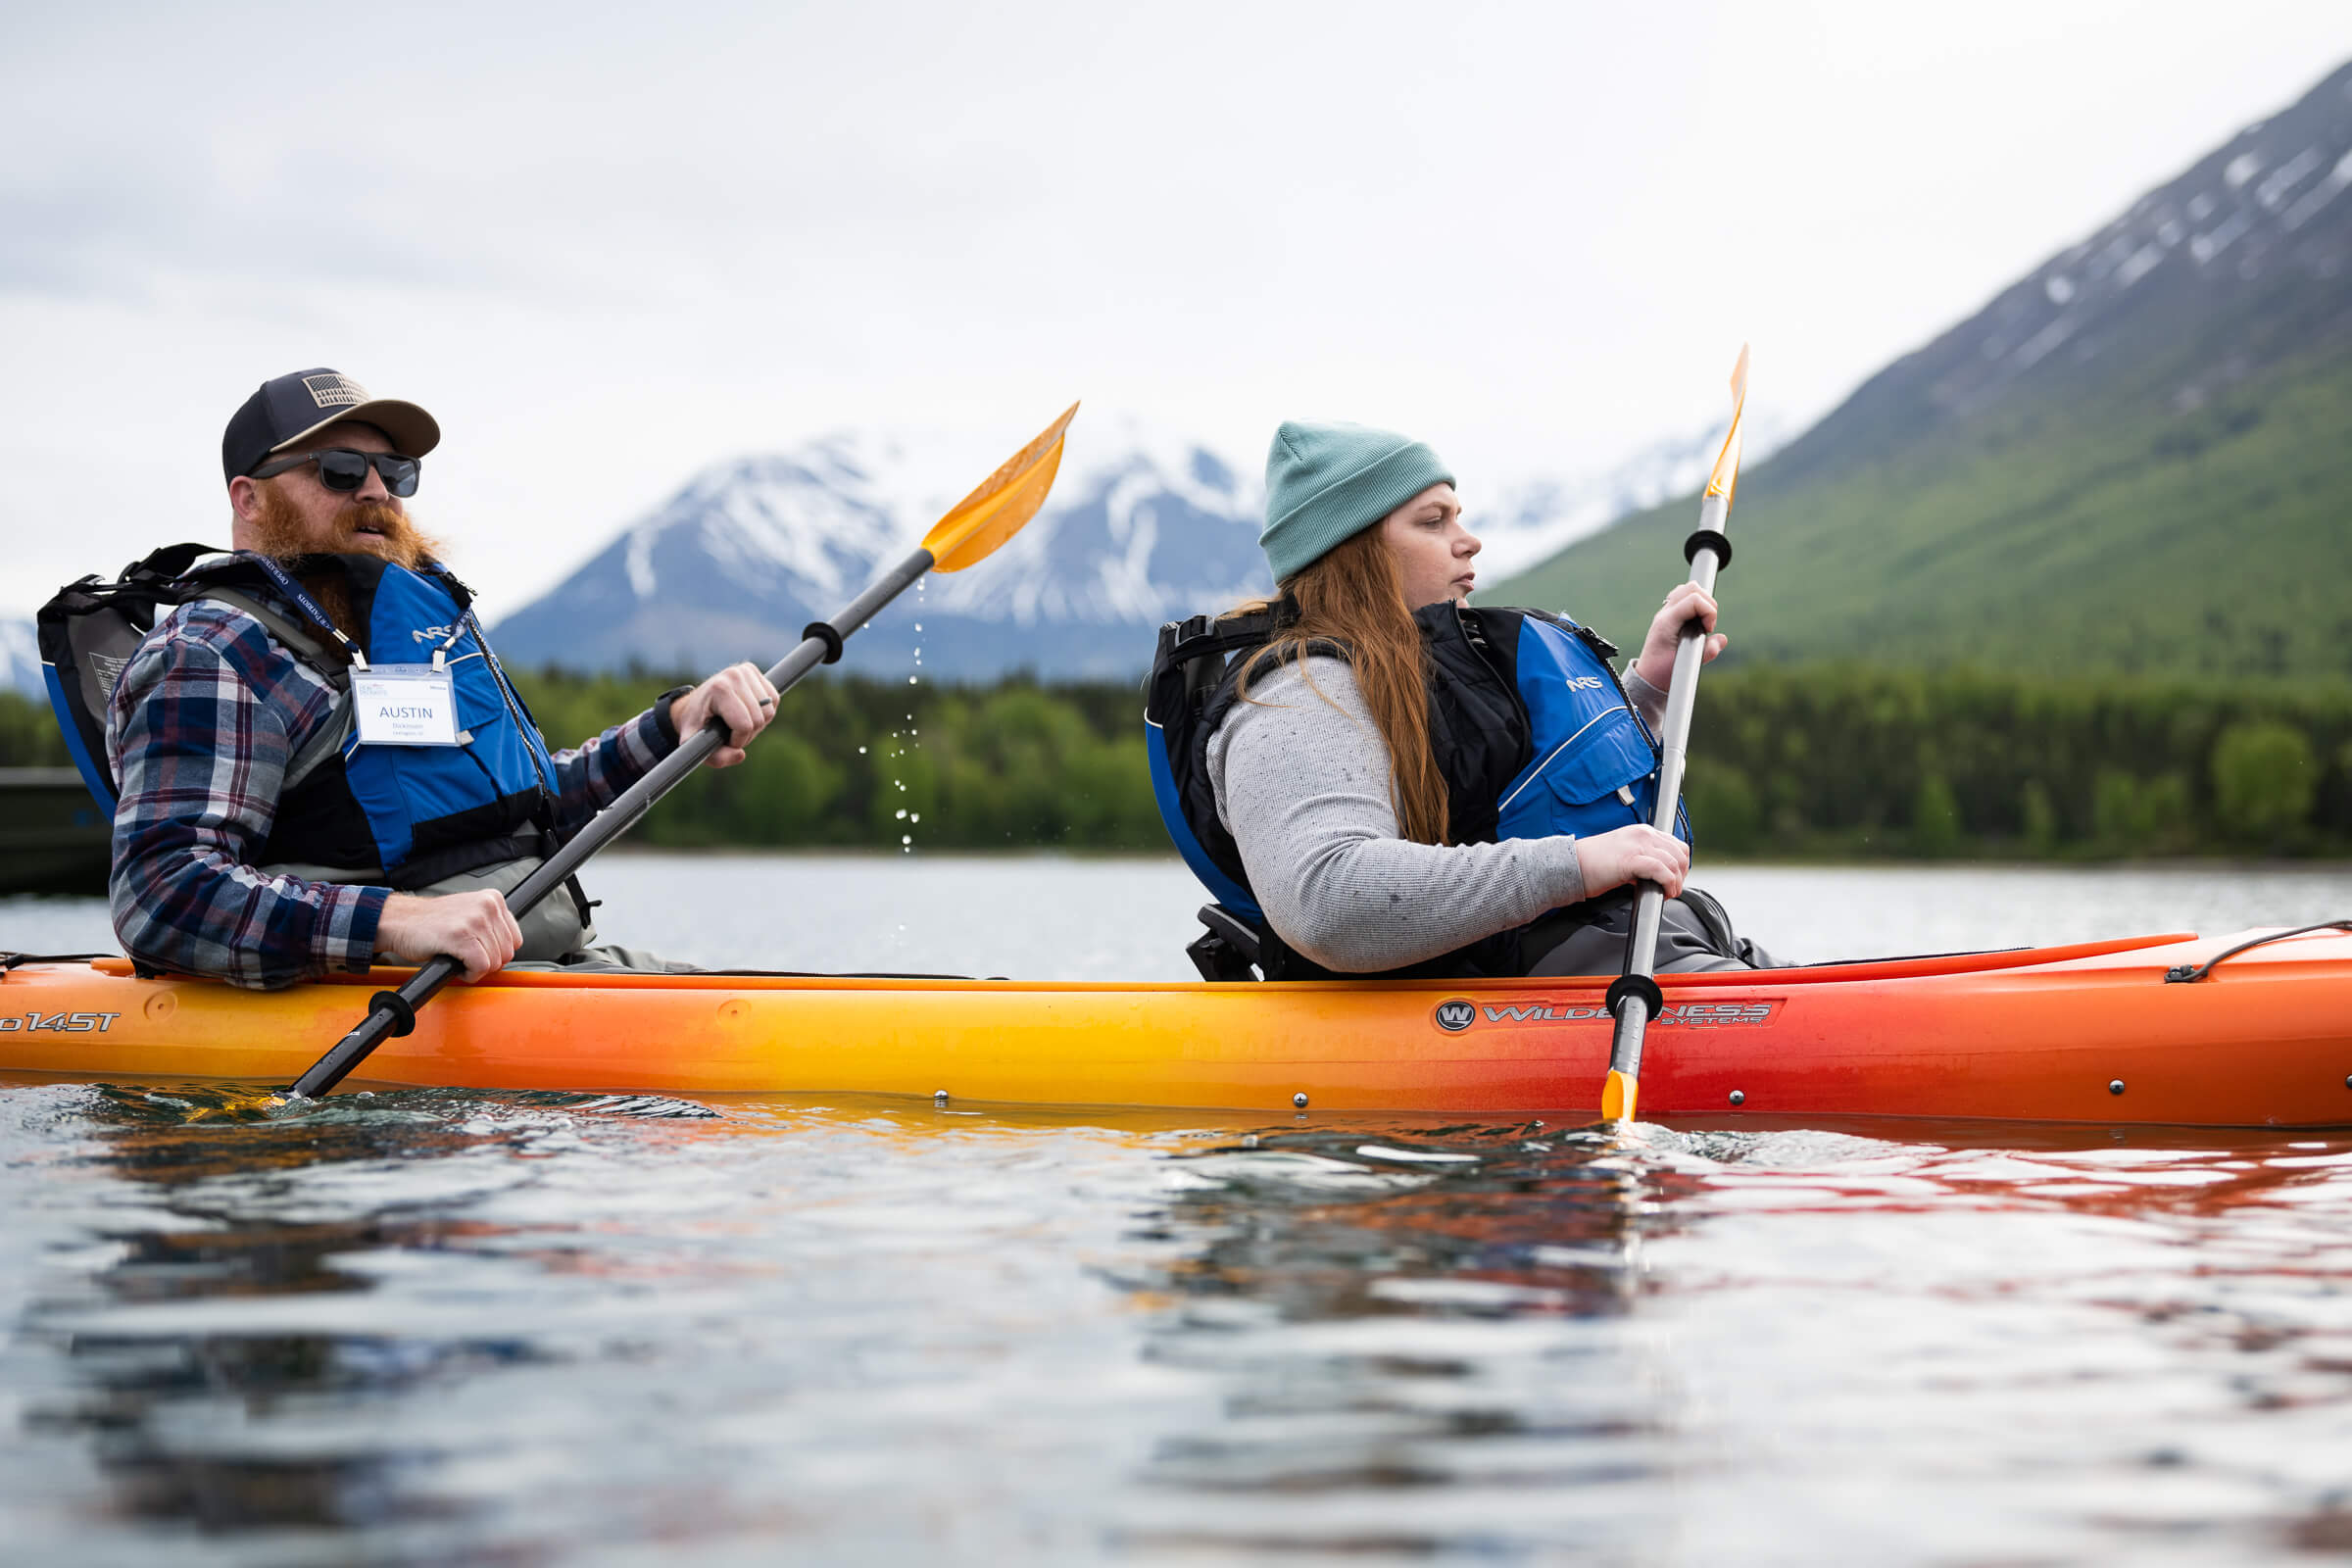 Kayaking in Lake Clark is one of many activities couples get to enjoy throughout the week.